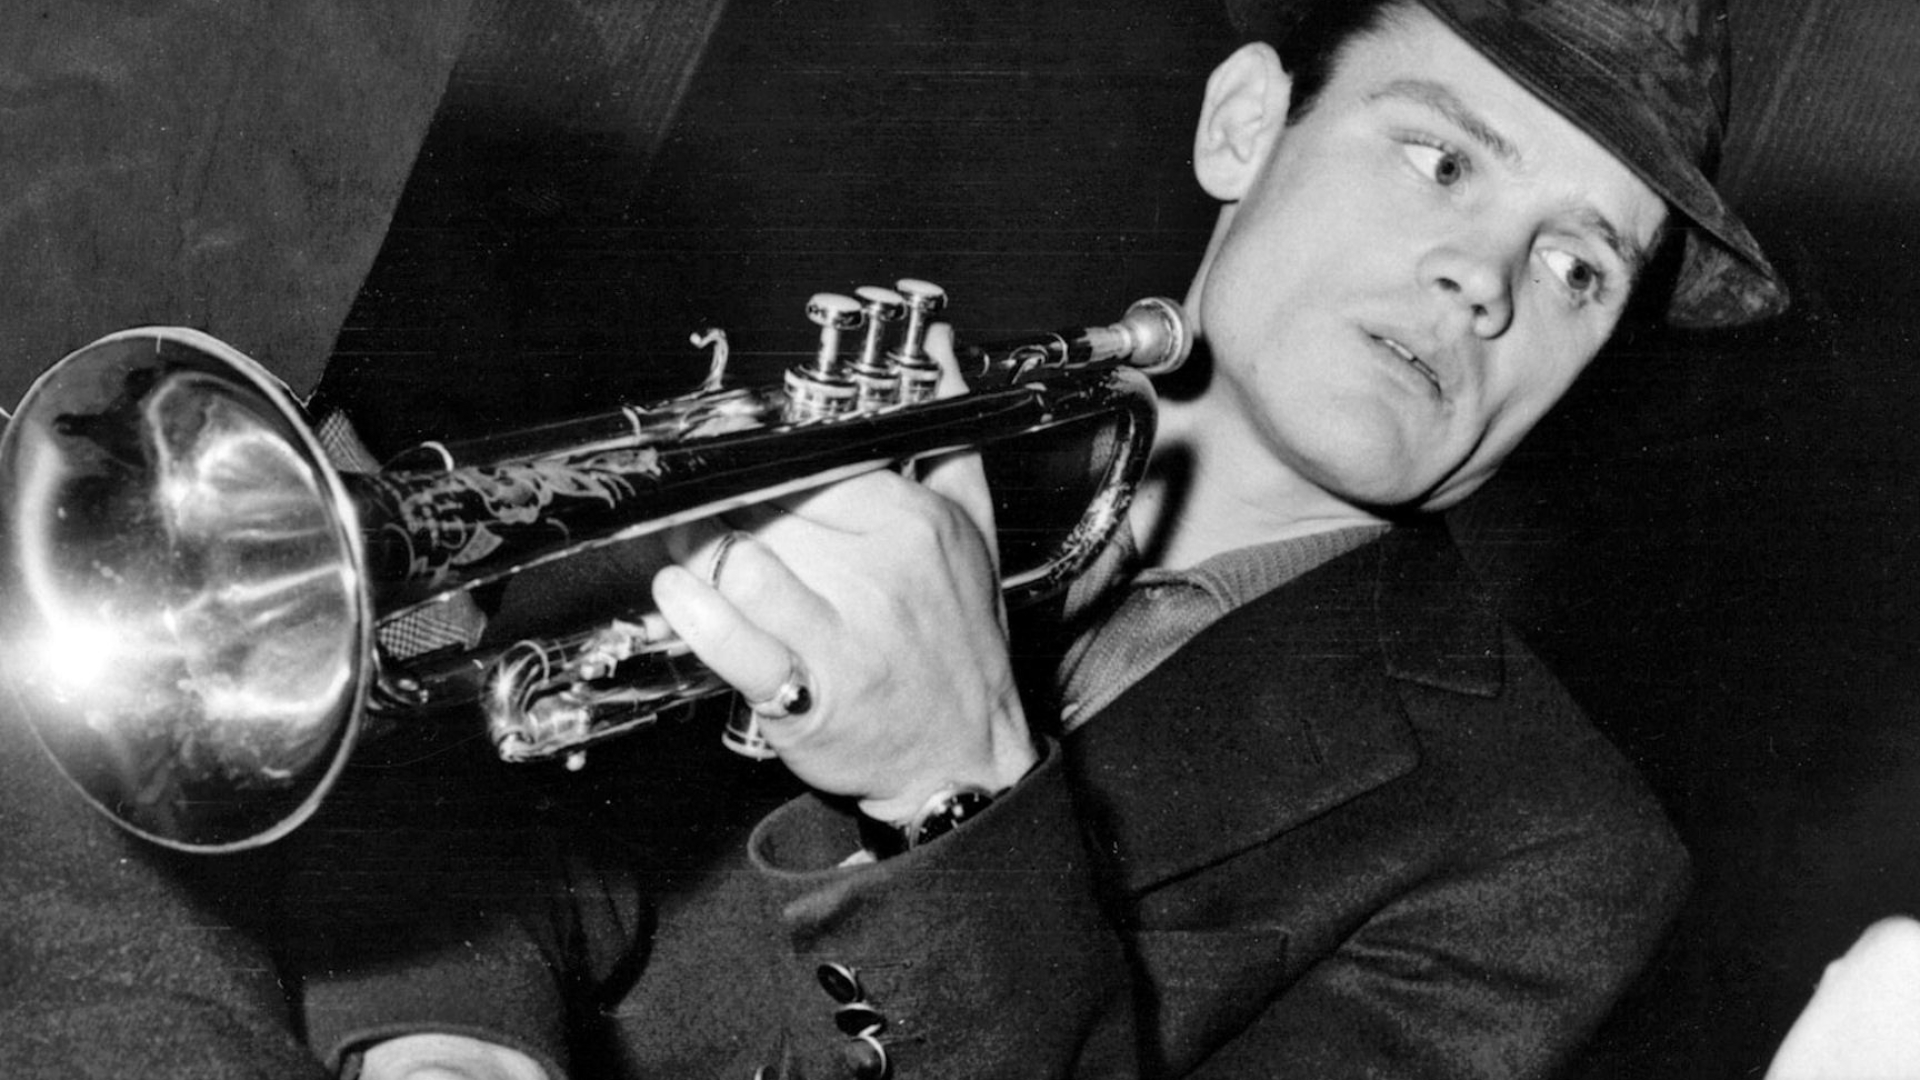 Trumpet: A wind  instrument, Chet Baker, An American musician and vocalist, The plaintive, fragile tone of playing. 1920x1080 Full HD Wallpaper.